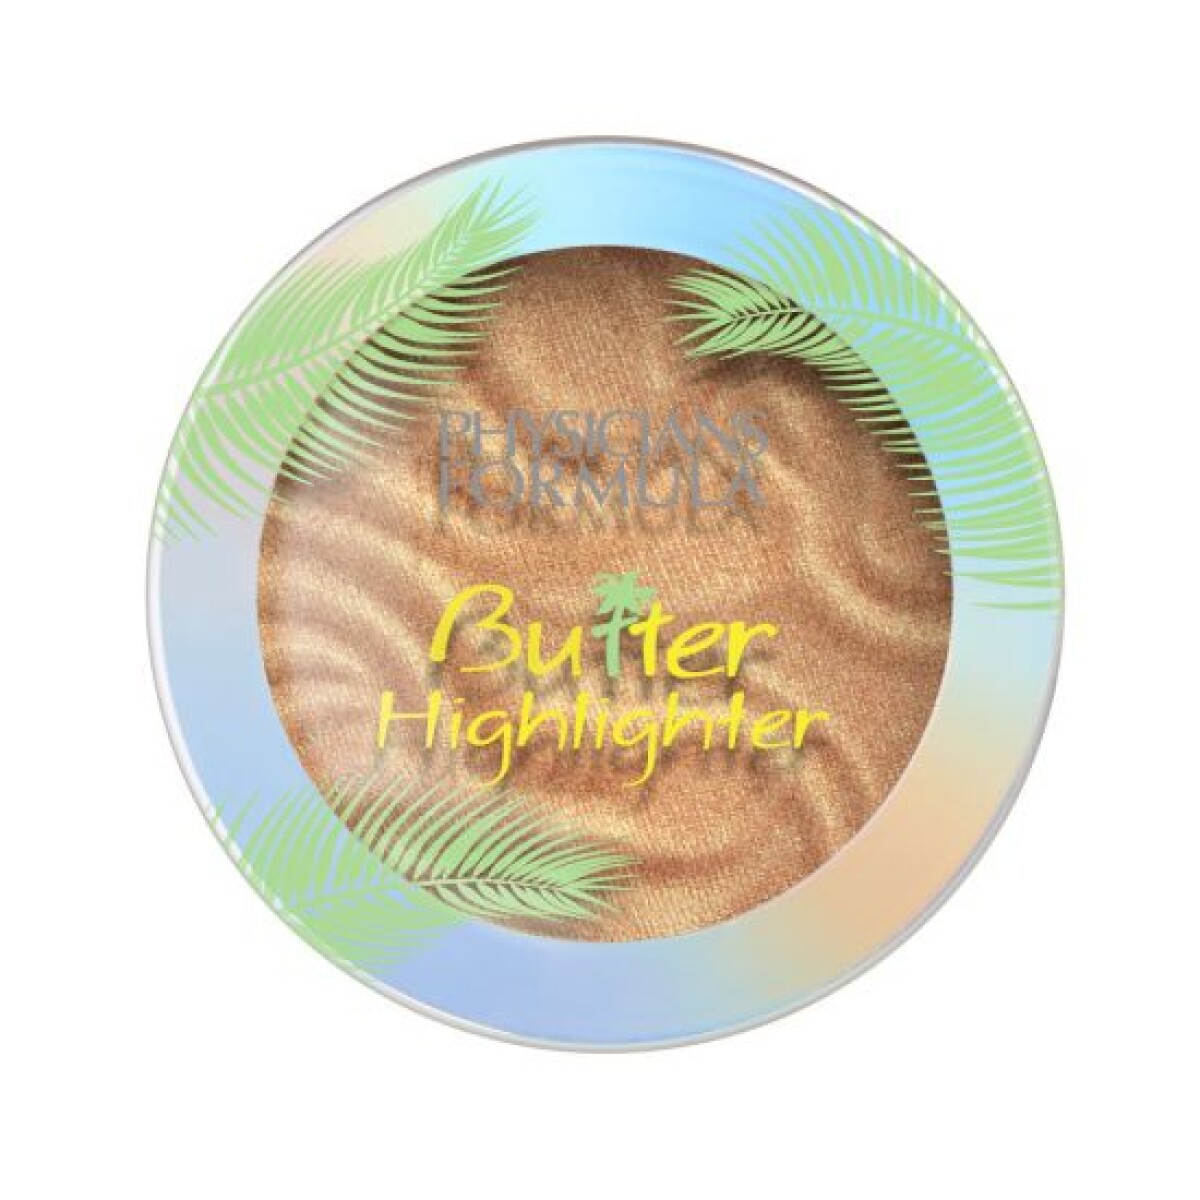 Physicians Formula Butter Highlighter- Champagne PF 10575 